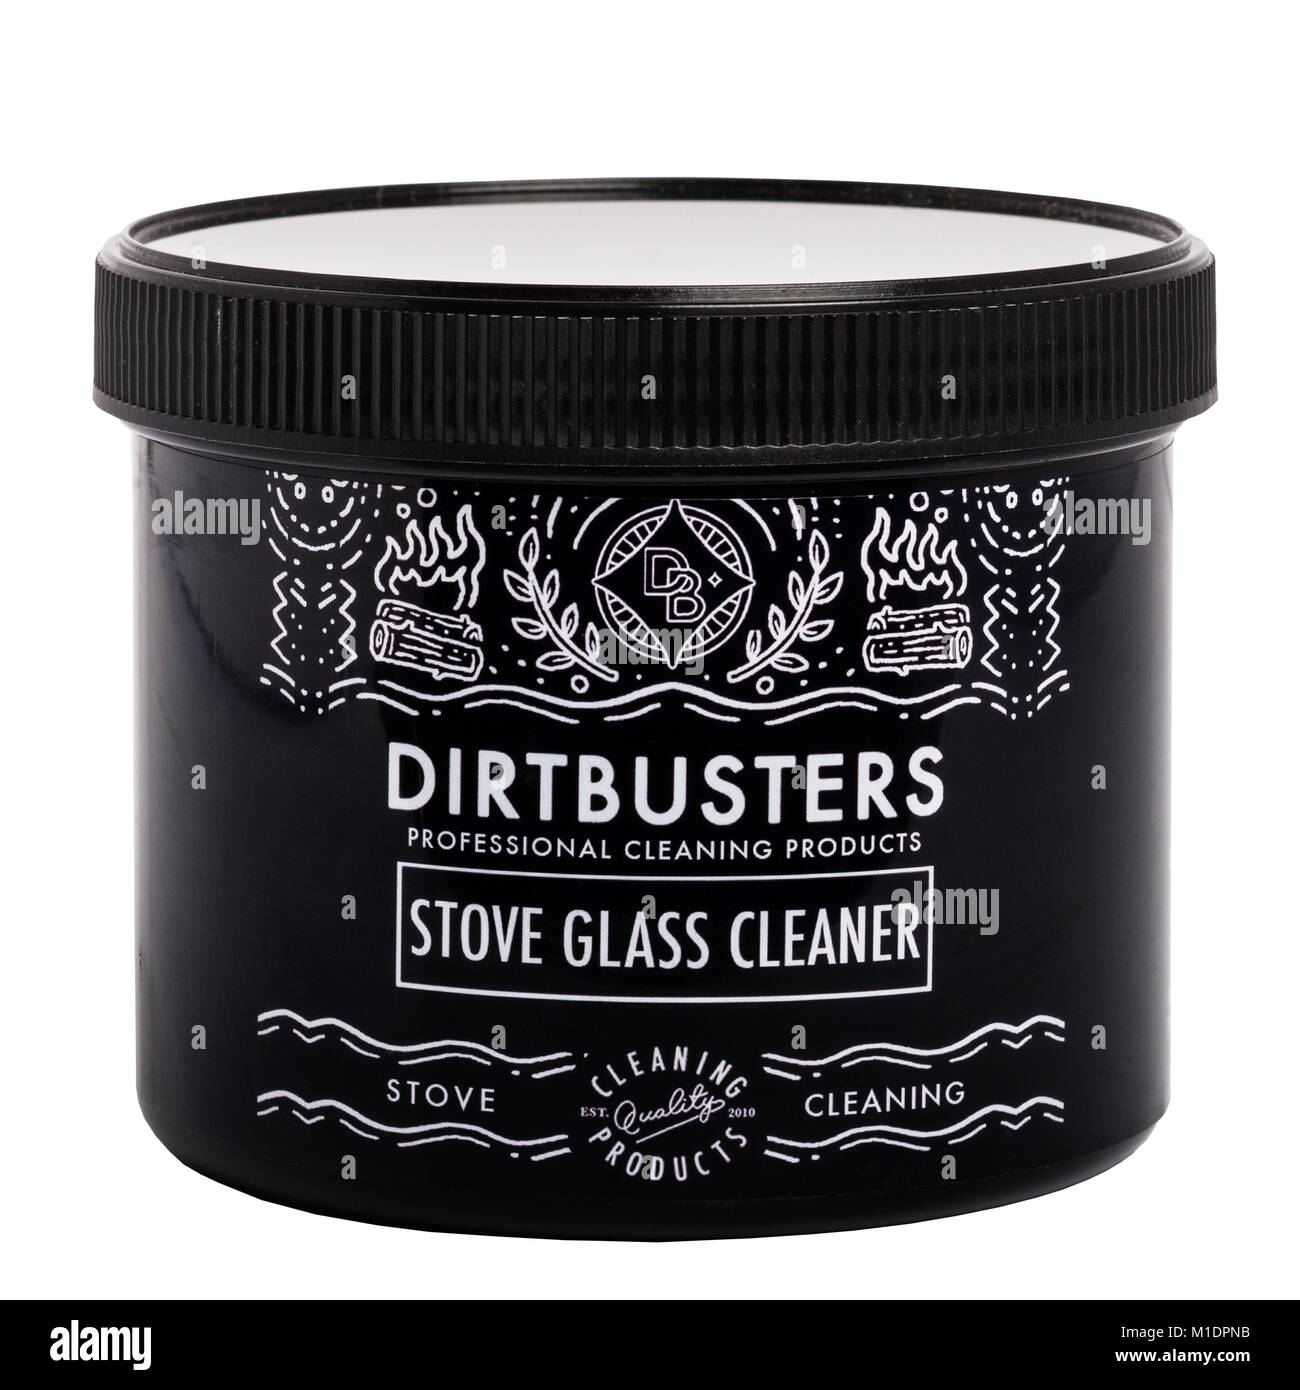 Dirtbusters stove glass cleaner on a white background Stock Photo